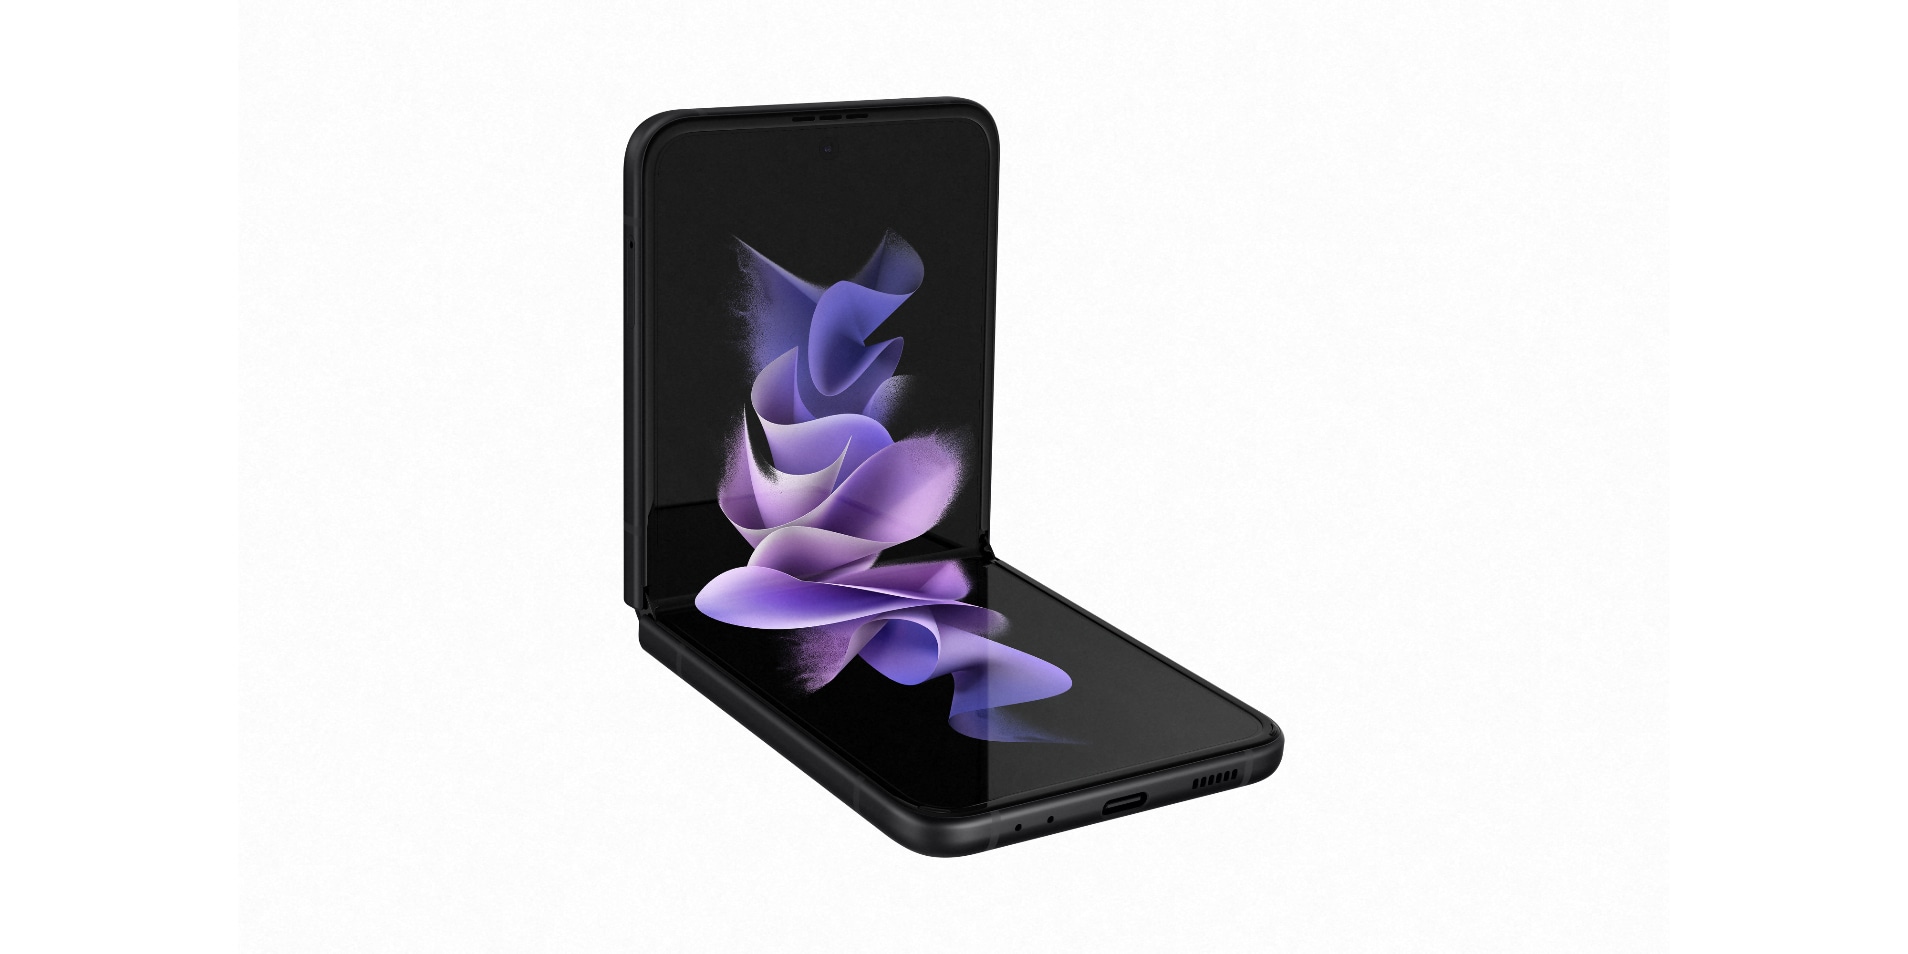 The Samsung Galaxy Z Flip3 folds in half and is now finally available